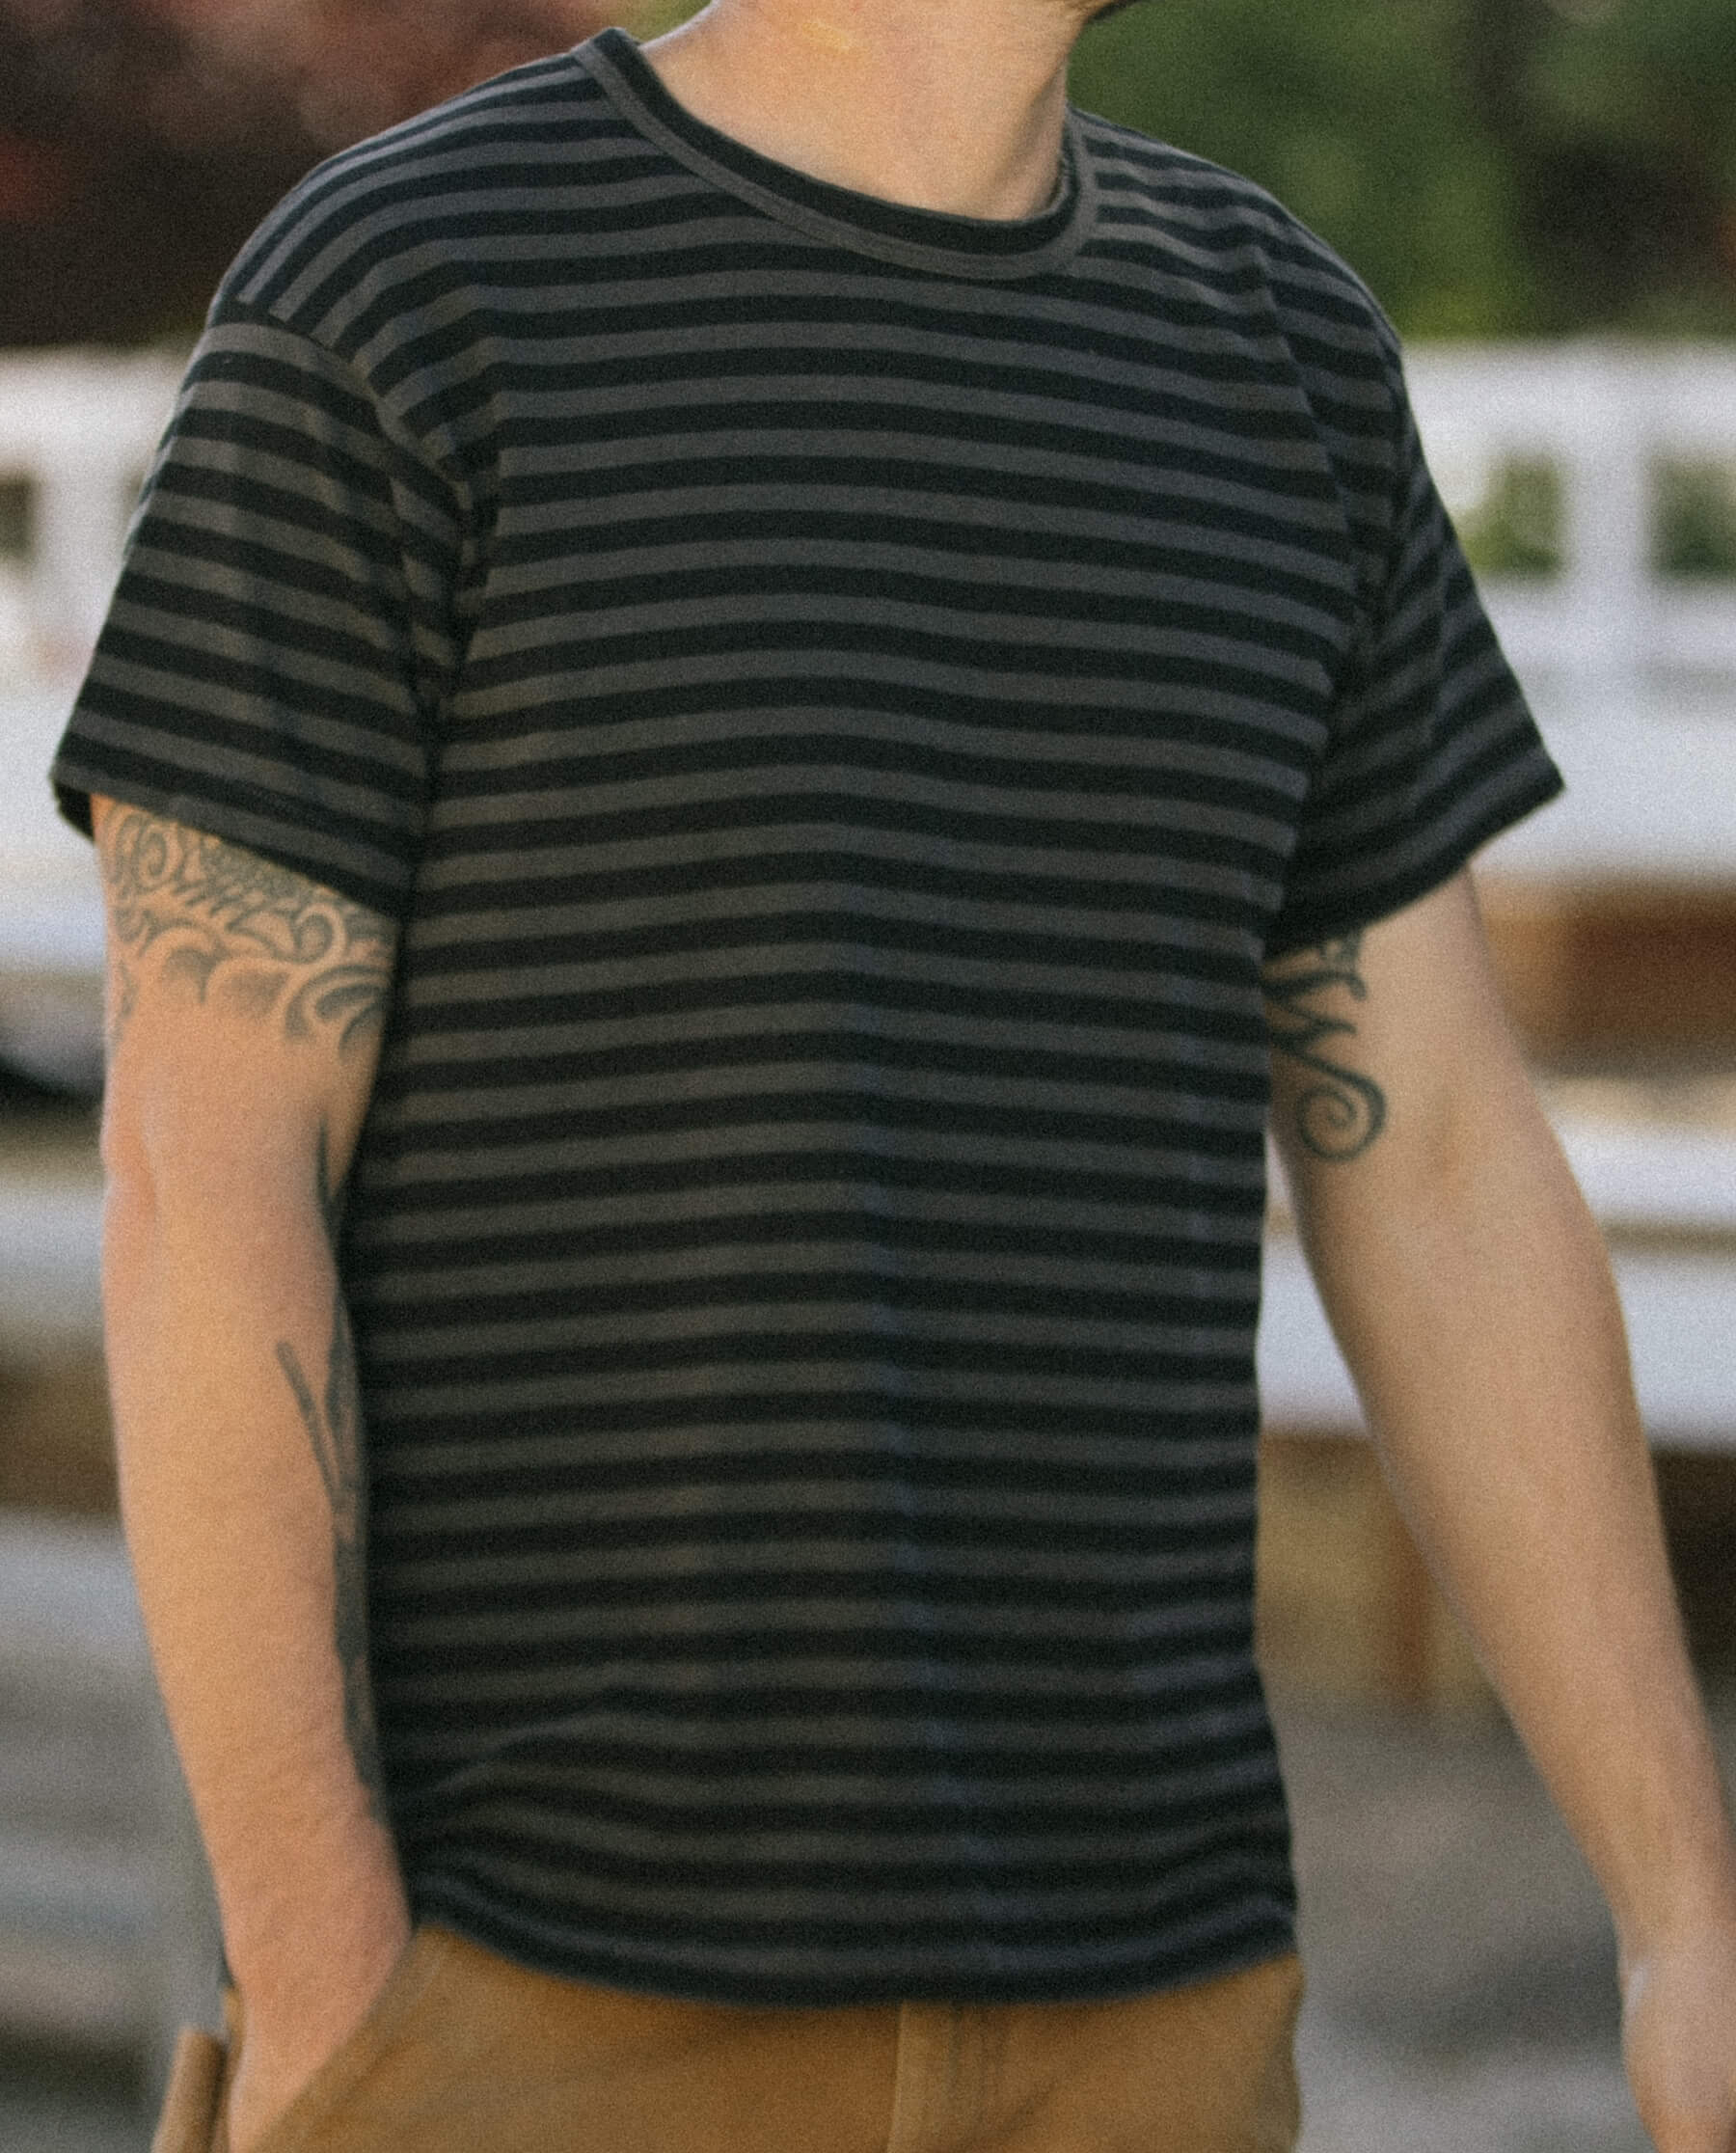 The Men's Boxy Crew. -- Black and Charcoal Stripe TEES THE GREAT. SU22 MENS